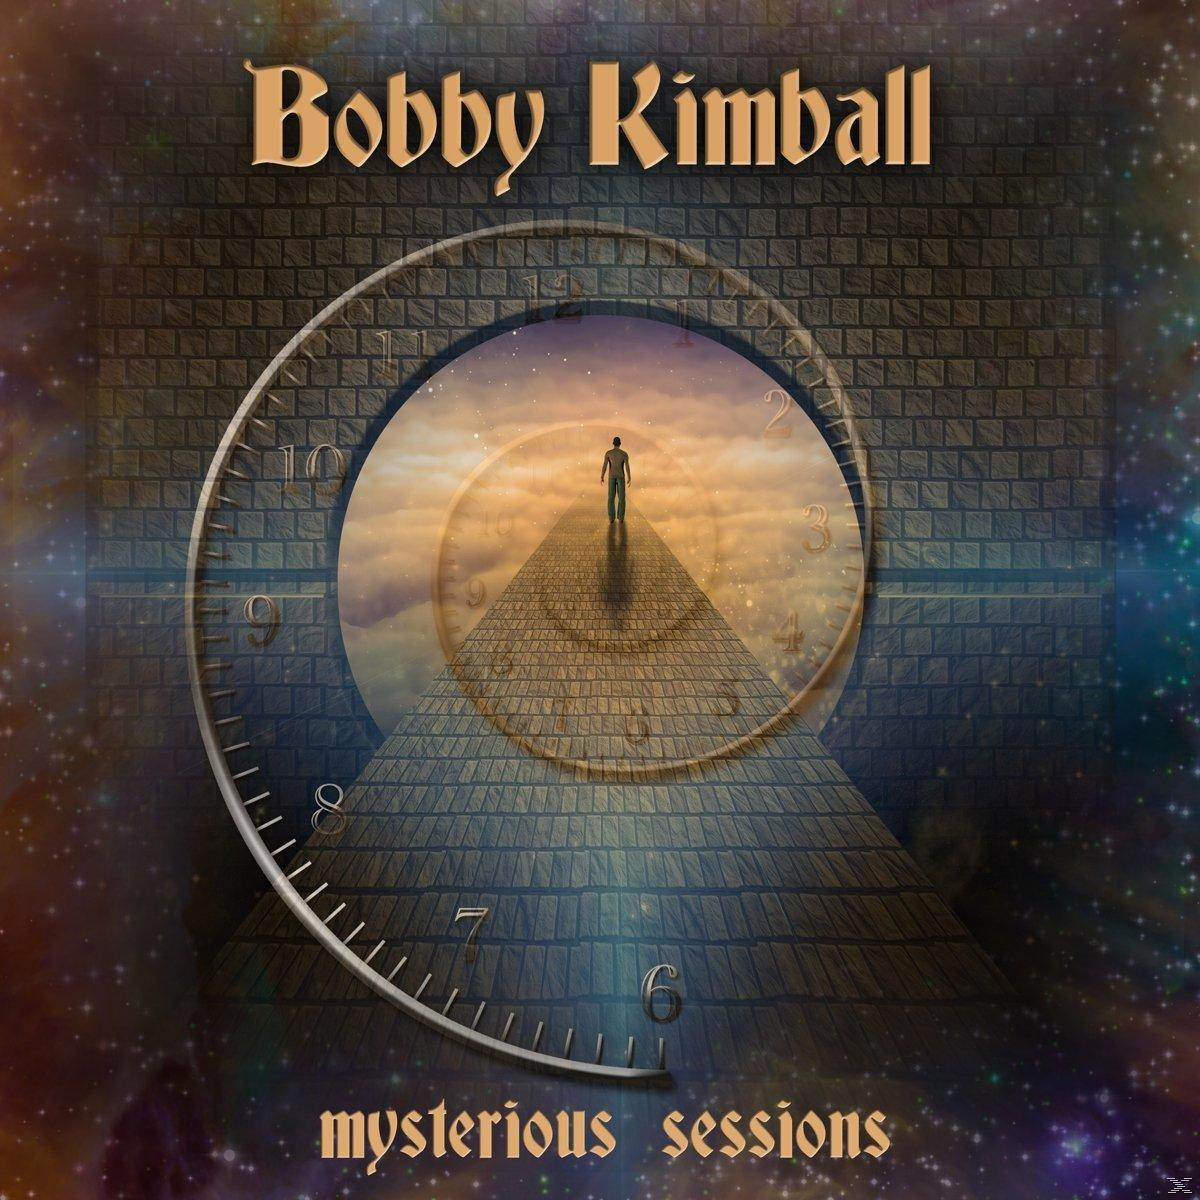 - Sessions (CD) Bobby Mysterious - Kimball